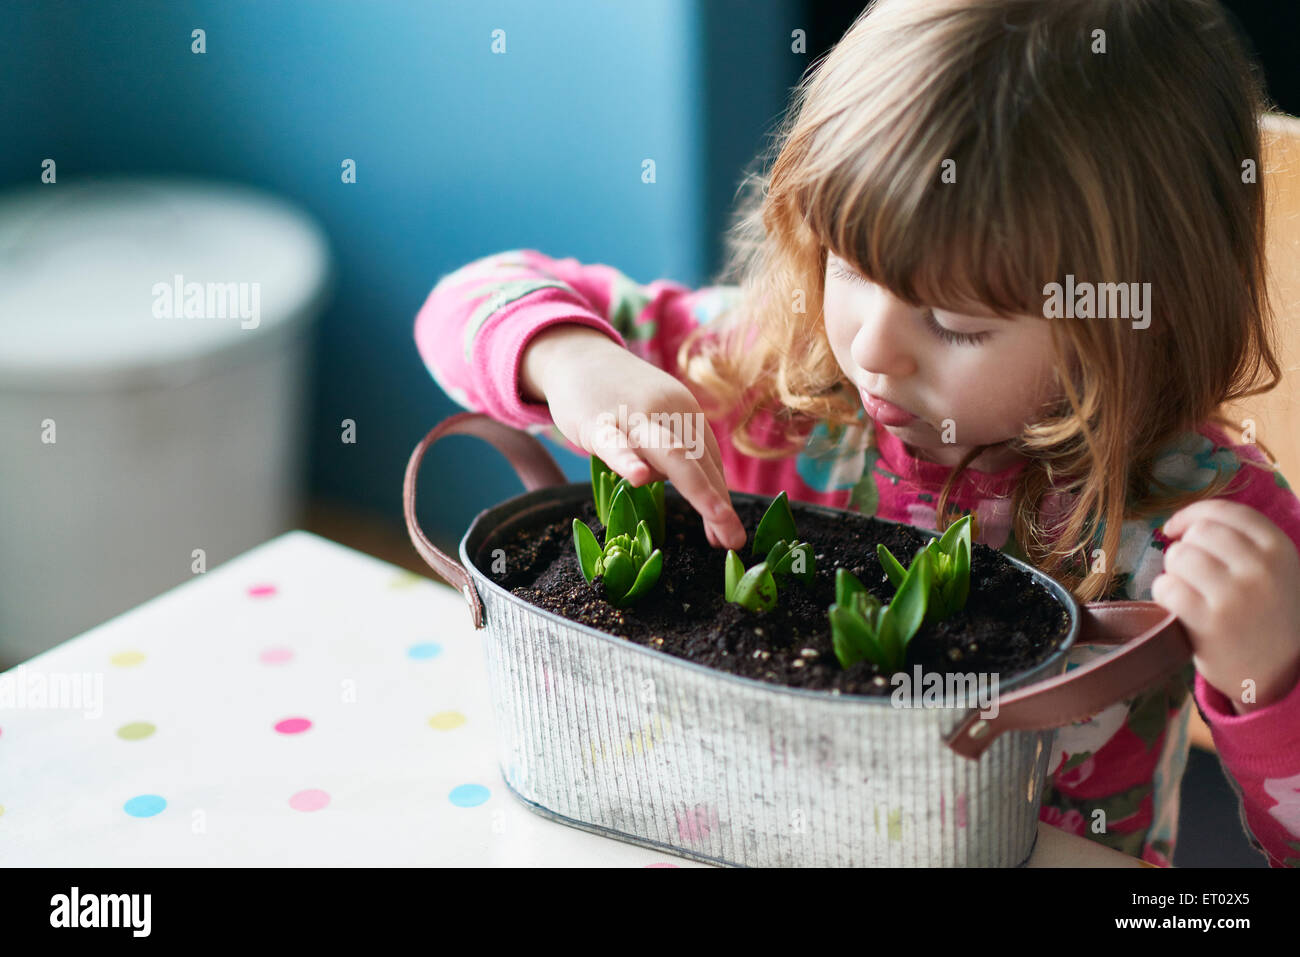 Curious girl touching sprouting flowers in flowerpot Stock Photo